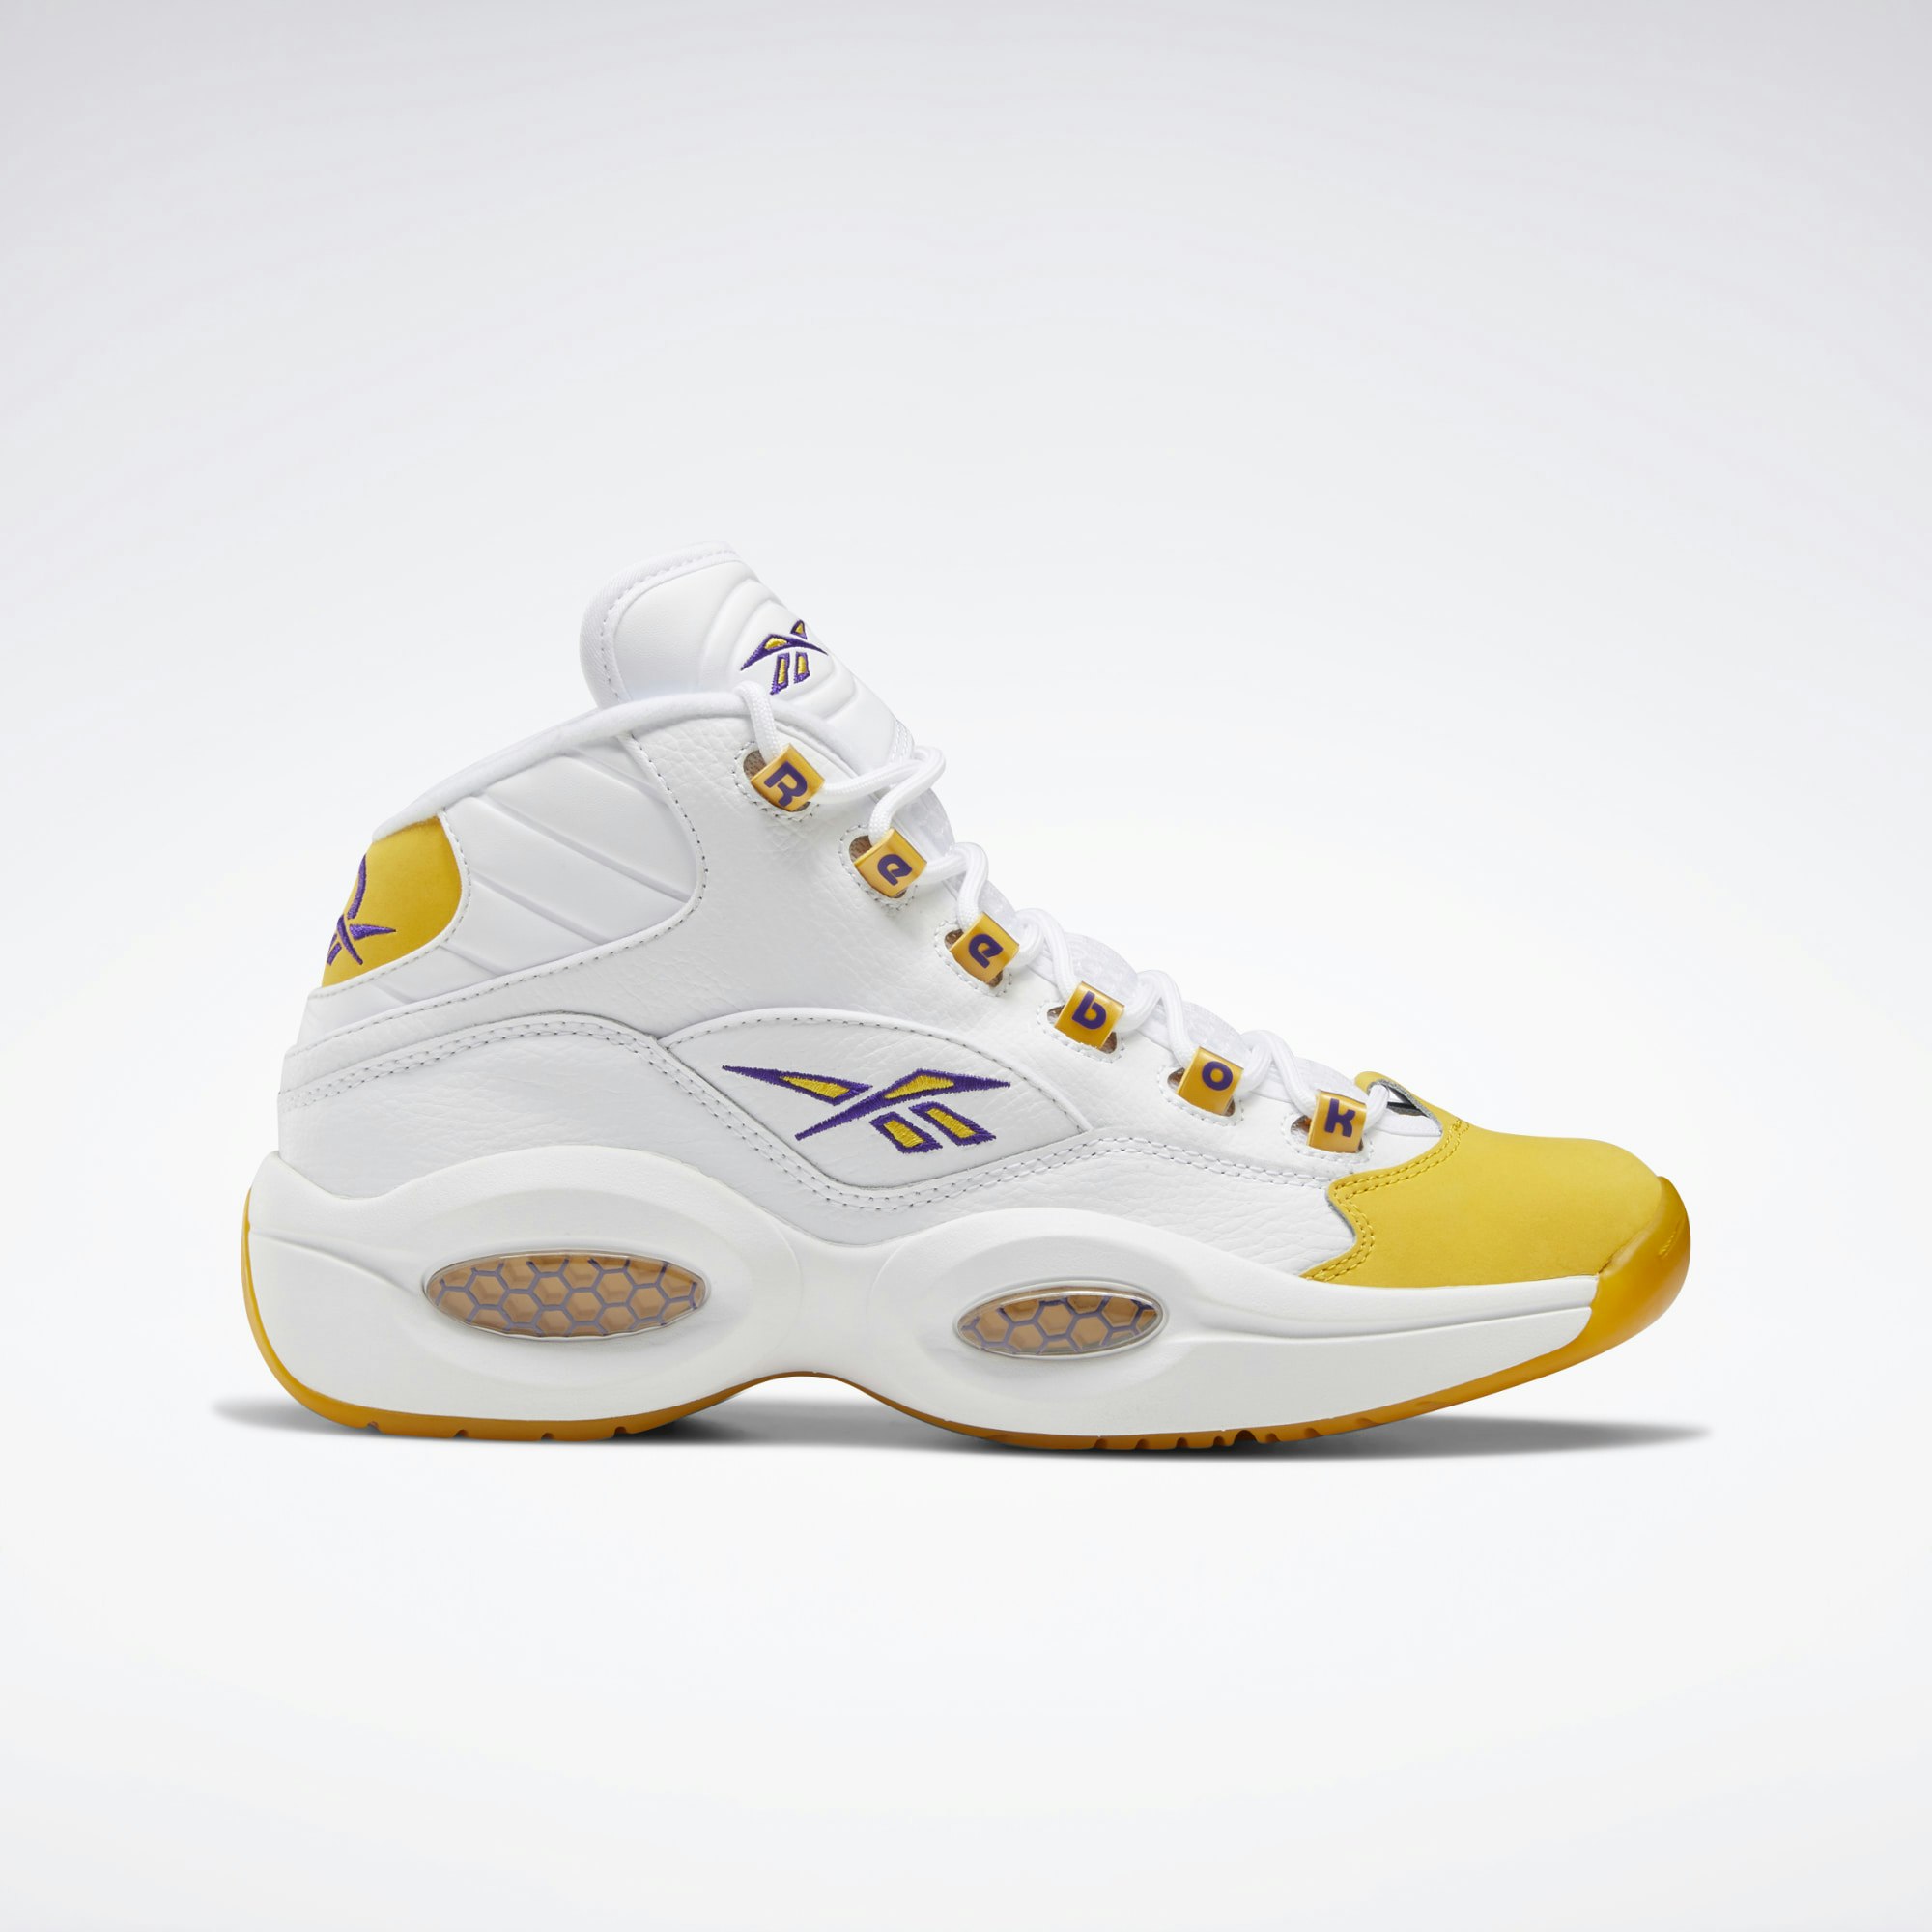 Reebok Question Mid "Lakers"